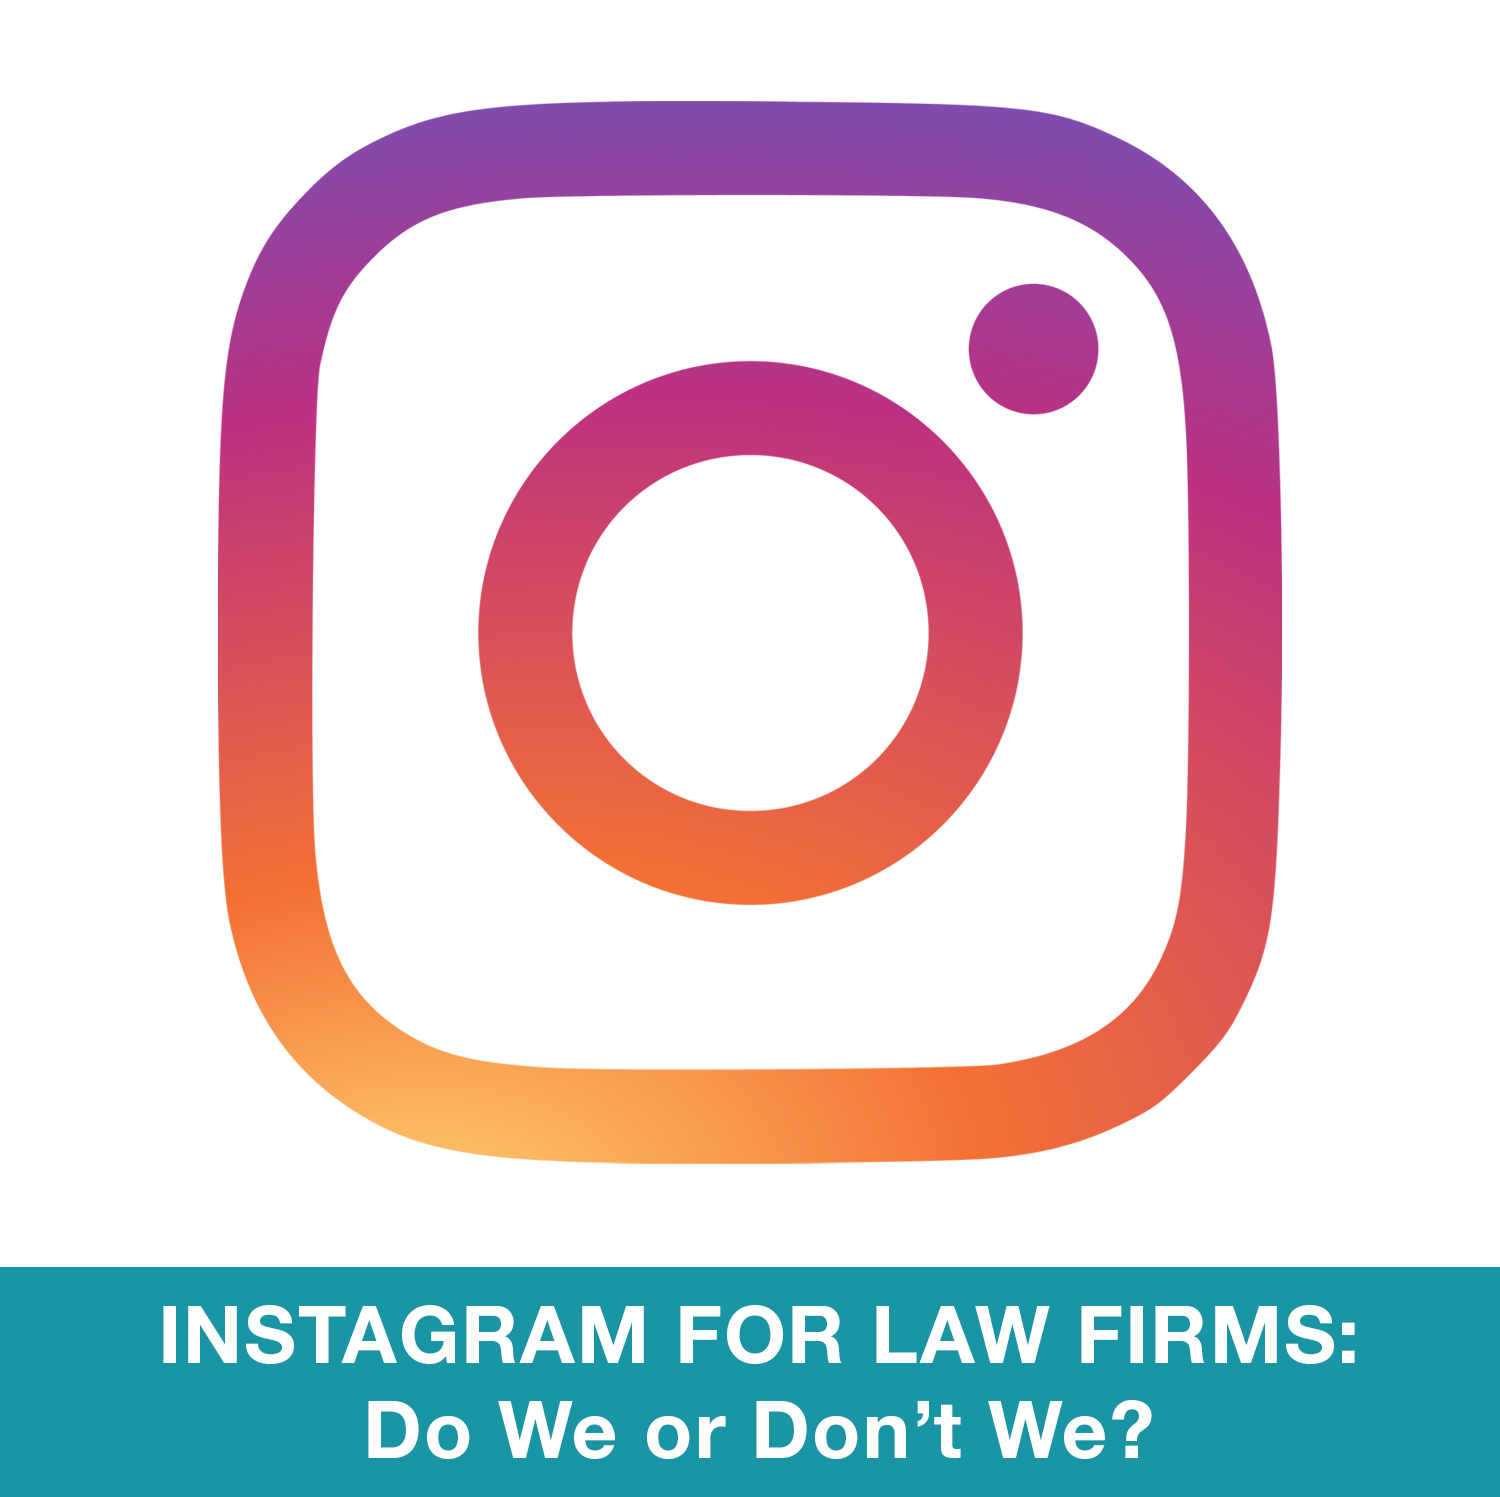 Instagram for Law Firms: Do We or Don’t We?